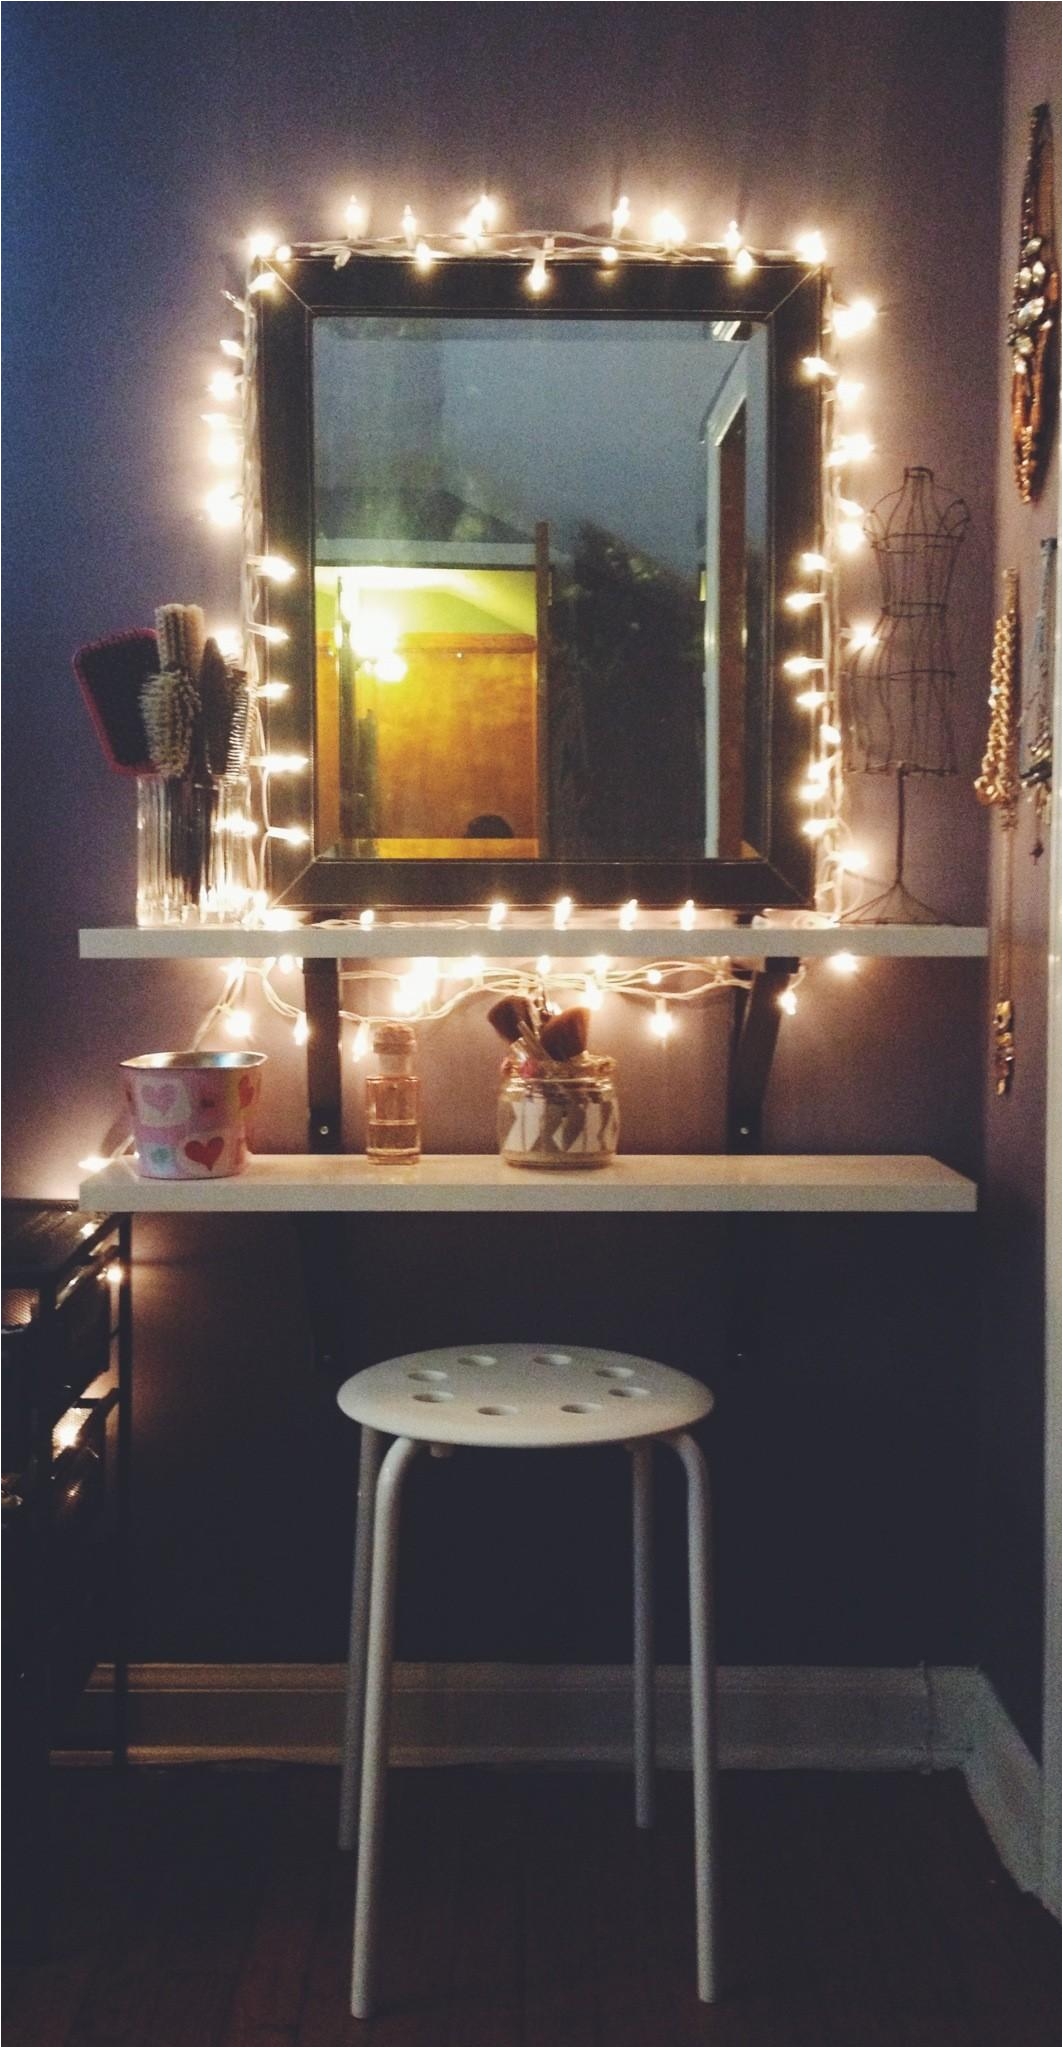 diy vanity bench lovely lighting vanity mirror with light bulbs makeup table and bench